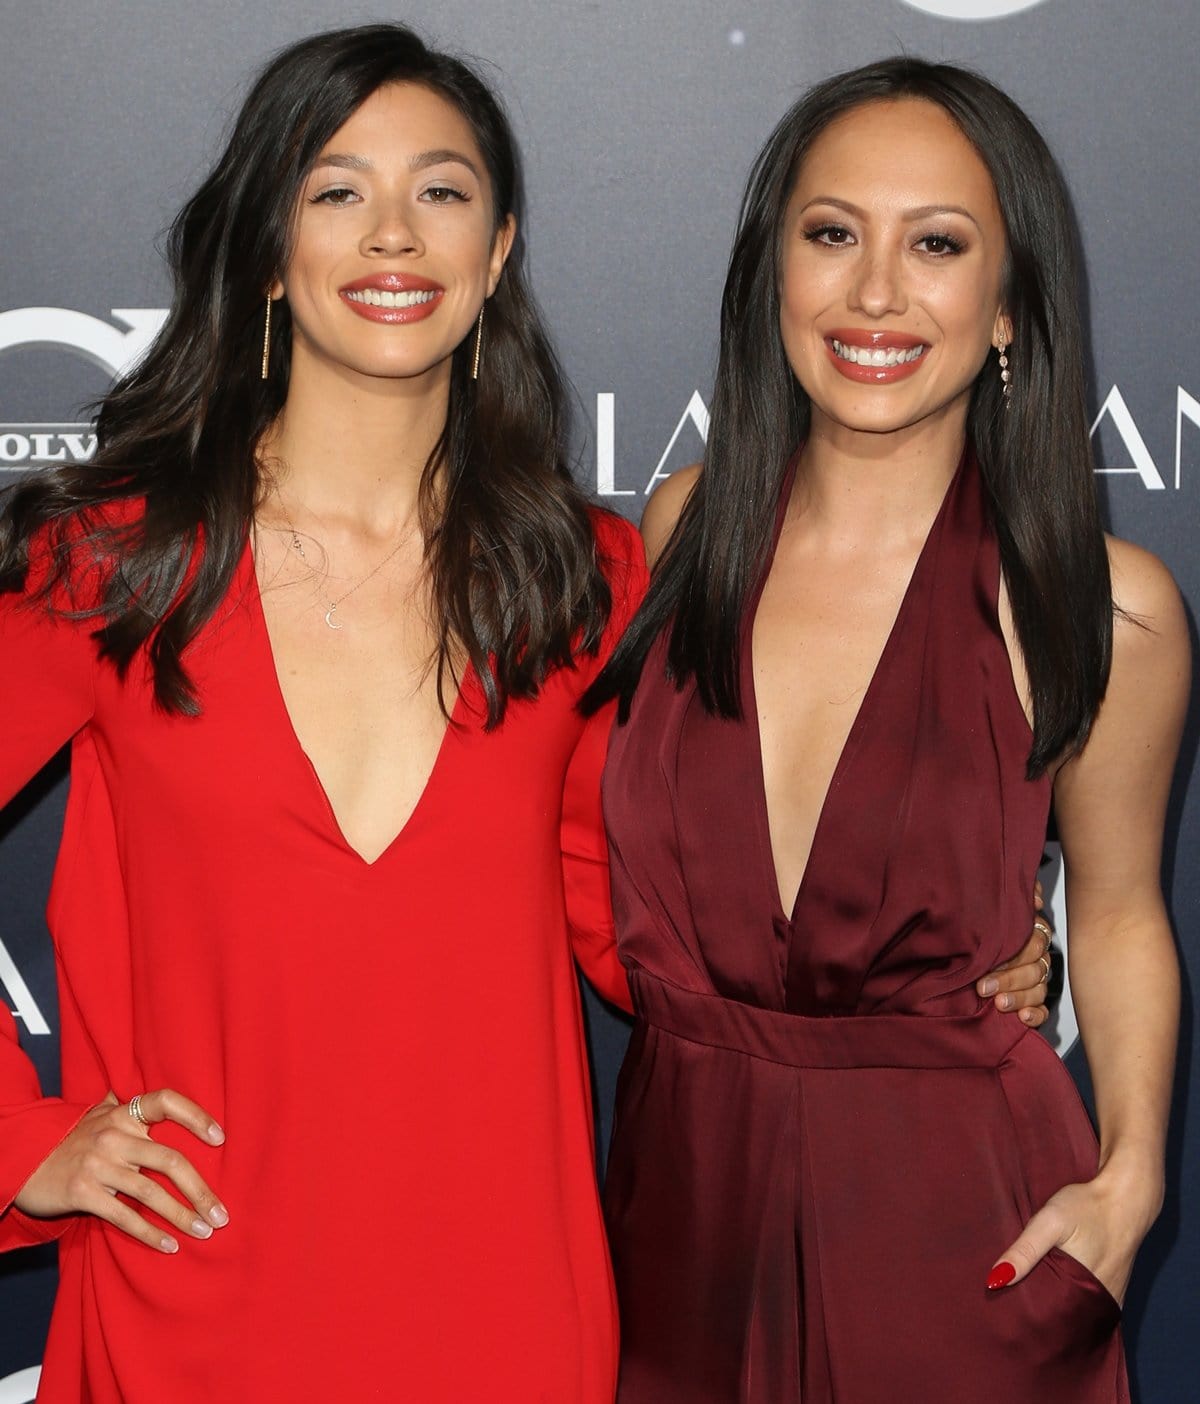 Actress Nicole Wolf is the younger half-sister of Cheryl Burke